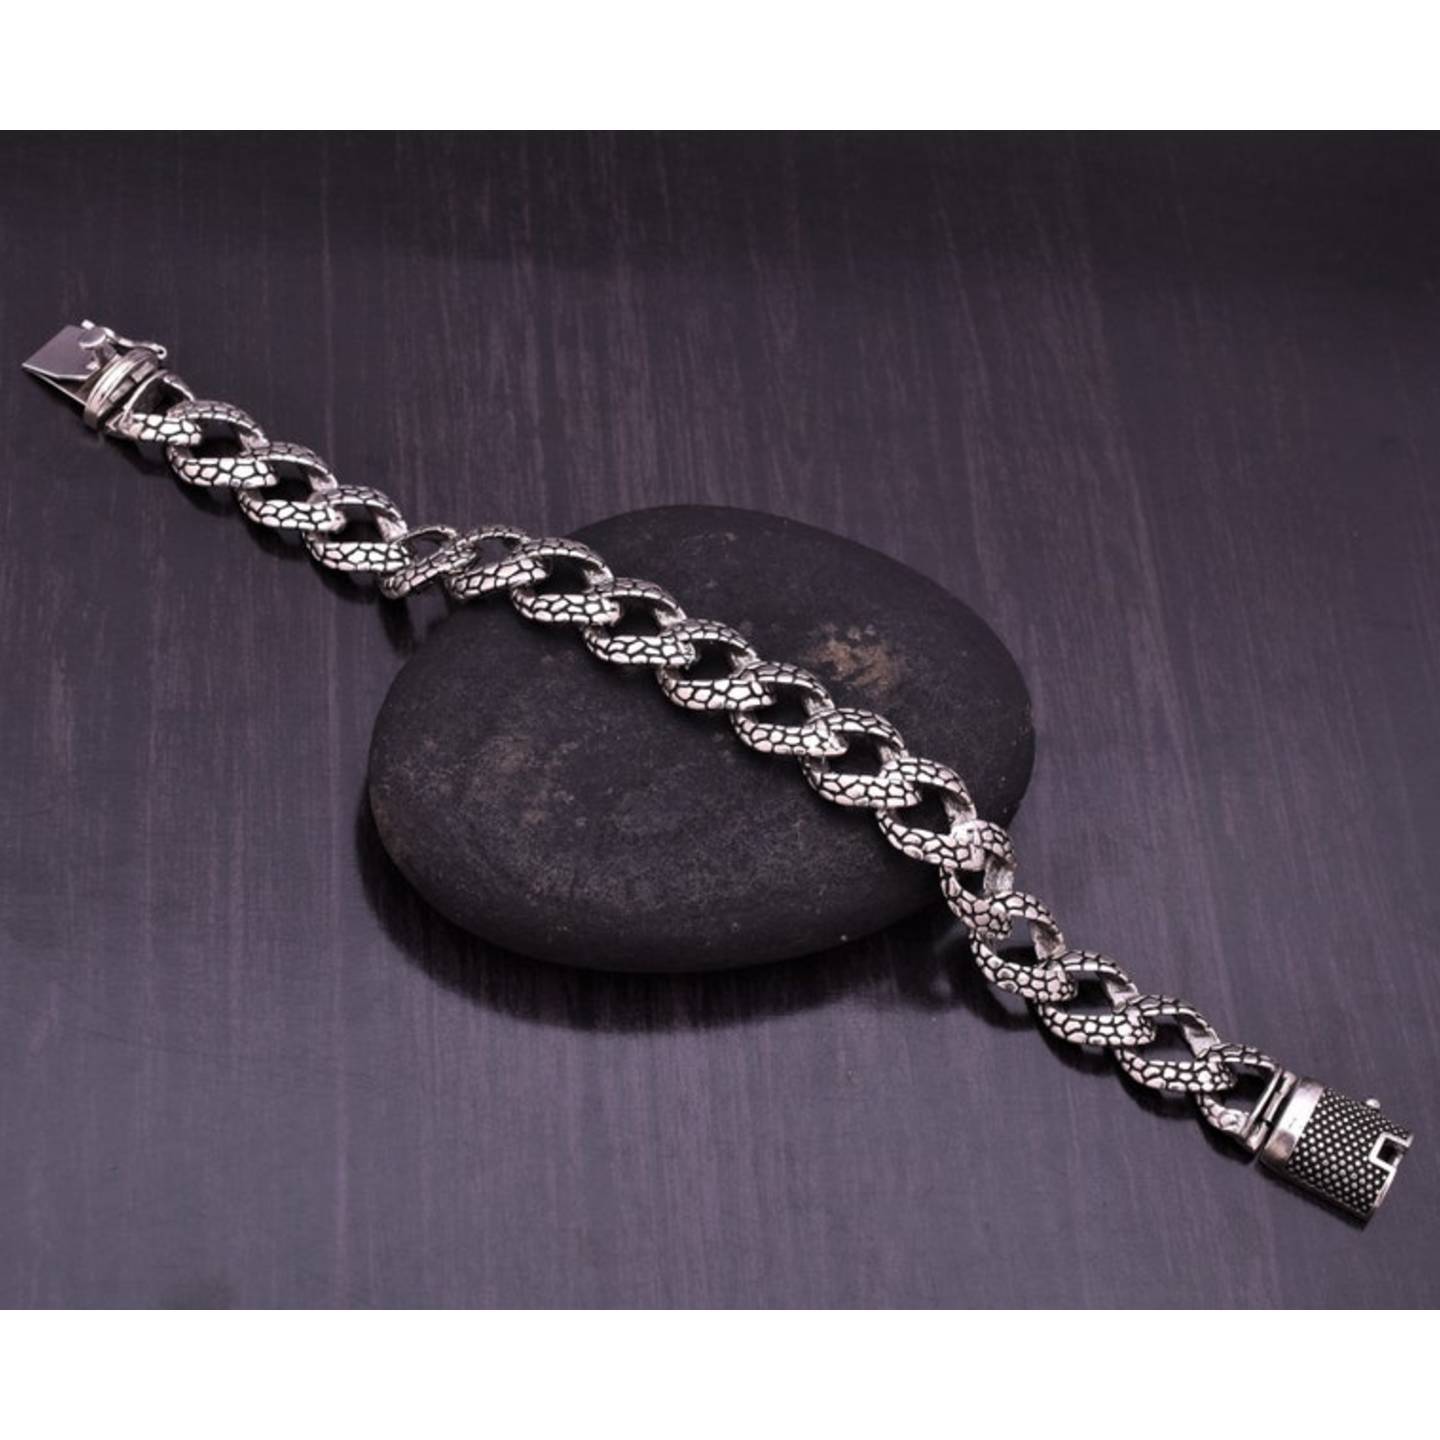 Solid 925 Sterling Silver Curb Chain Bracelet - Silver Oxidize Bracelet - Cuban Link Chain Bracelet - Length 8.25 Inches - Handmade Bracelet